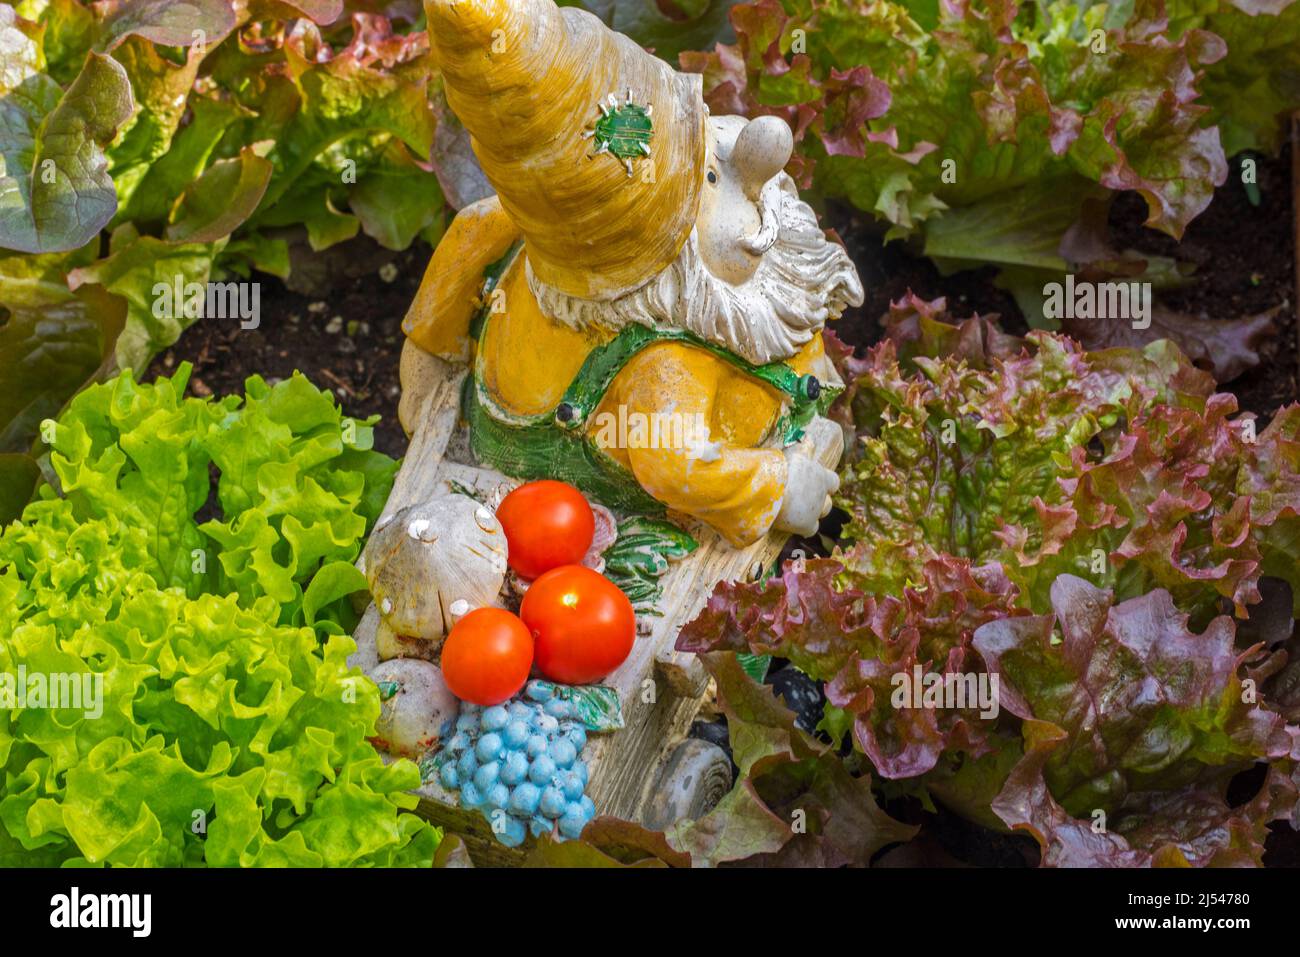 Garden gnome ornament figurine with wheelbarrow among different species of lettuce and vegetables in square foot garden in spring Stock Photo